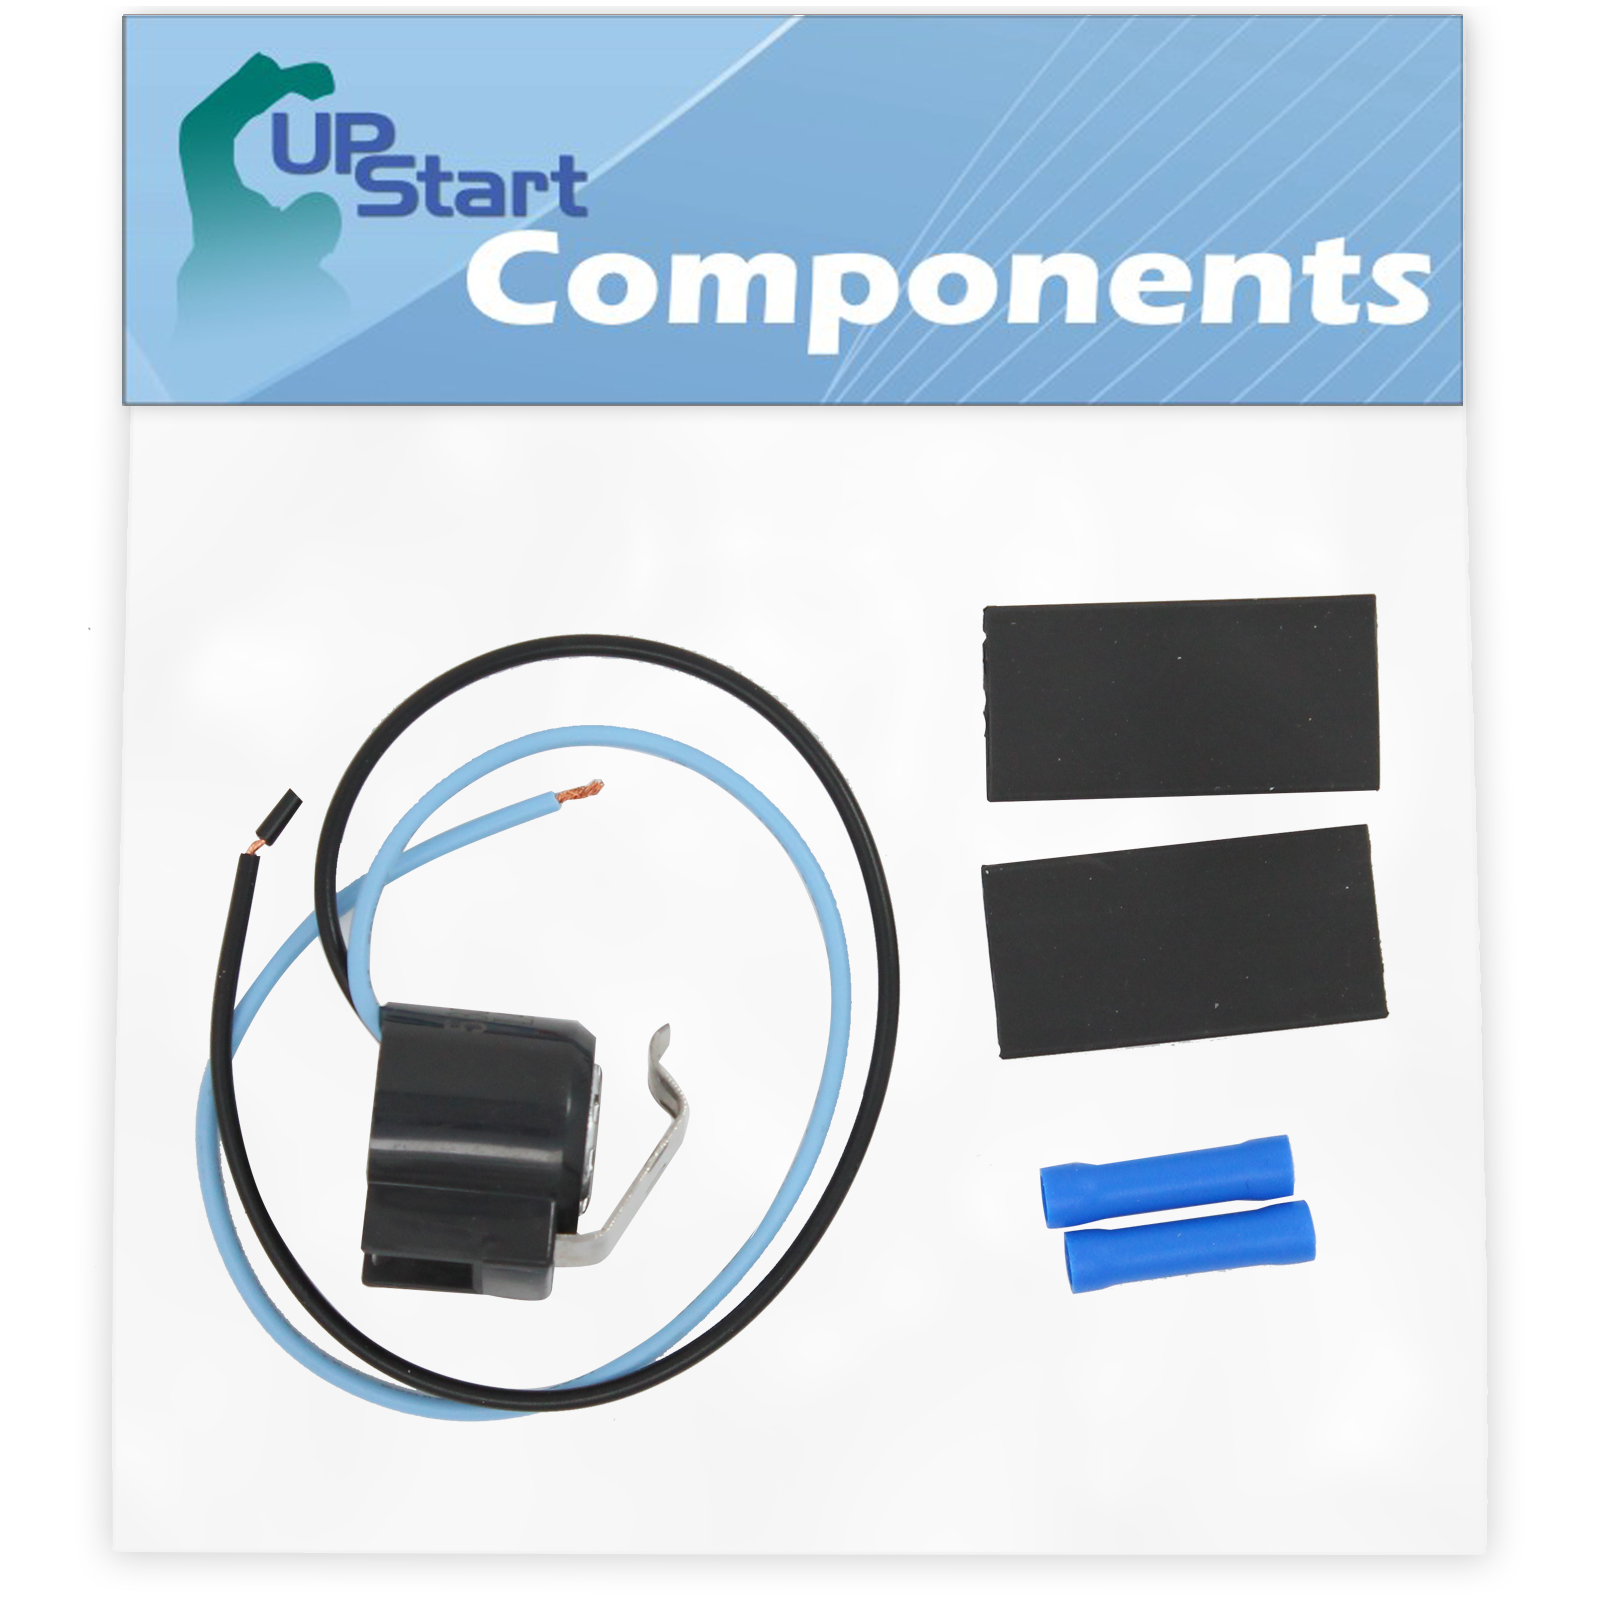 5303918214 Defrost Thermostat Replacement for Frigidaire FRS23R4CQ0 Refrigerator - Compatible with 5303918214 Defrost Thermostat Kit - UpStart Components Brand - image 1 of 2